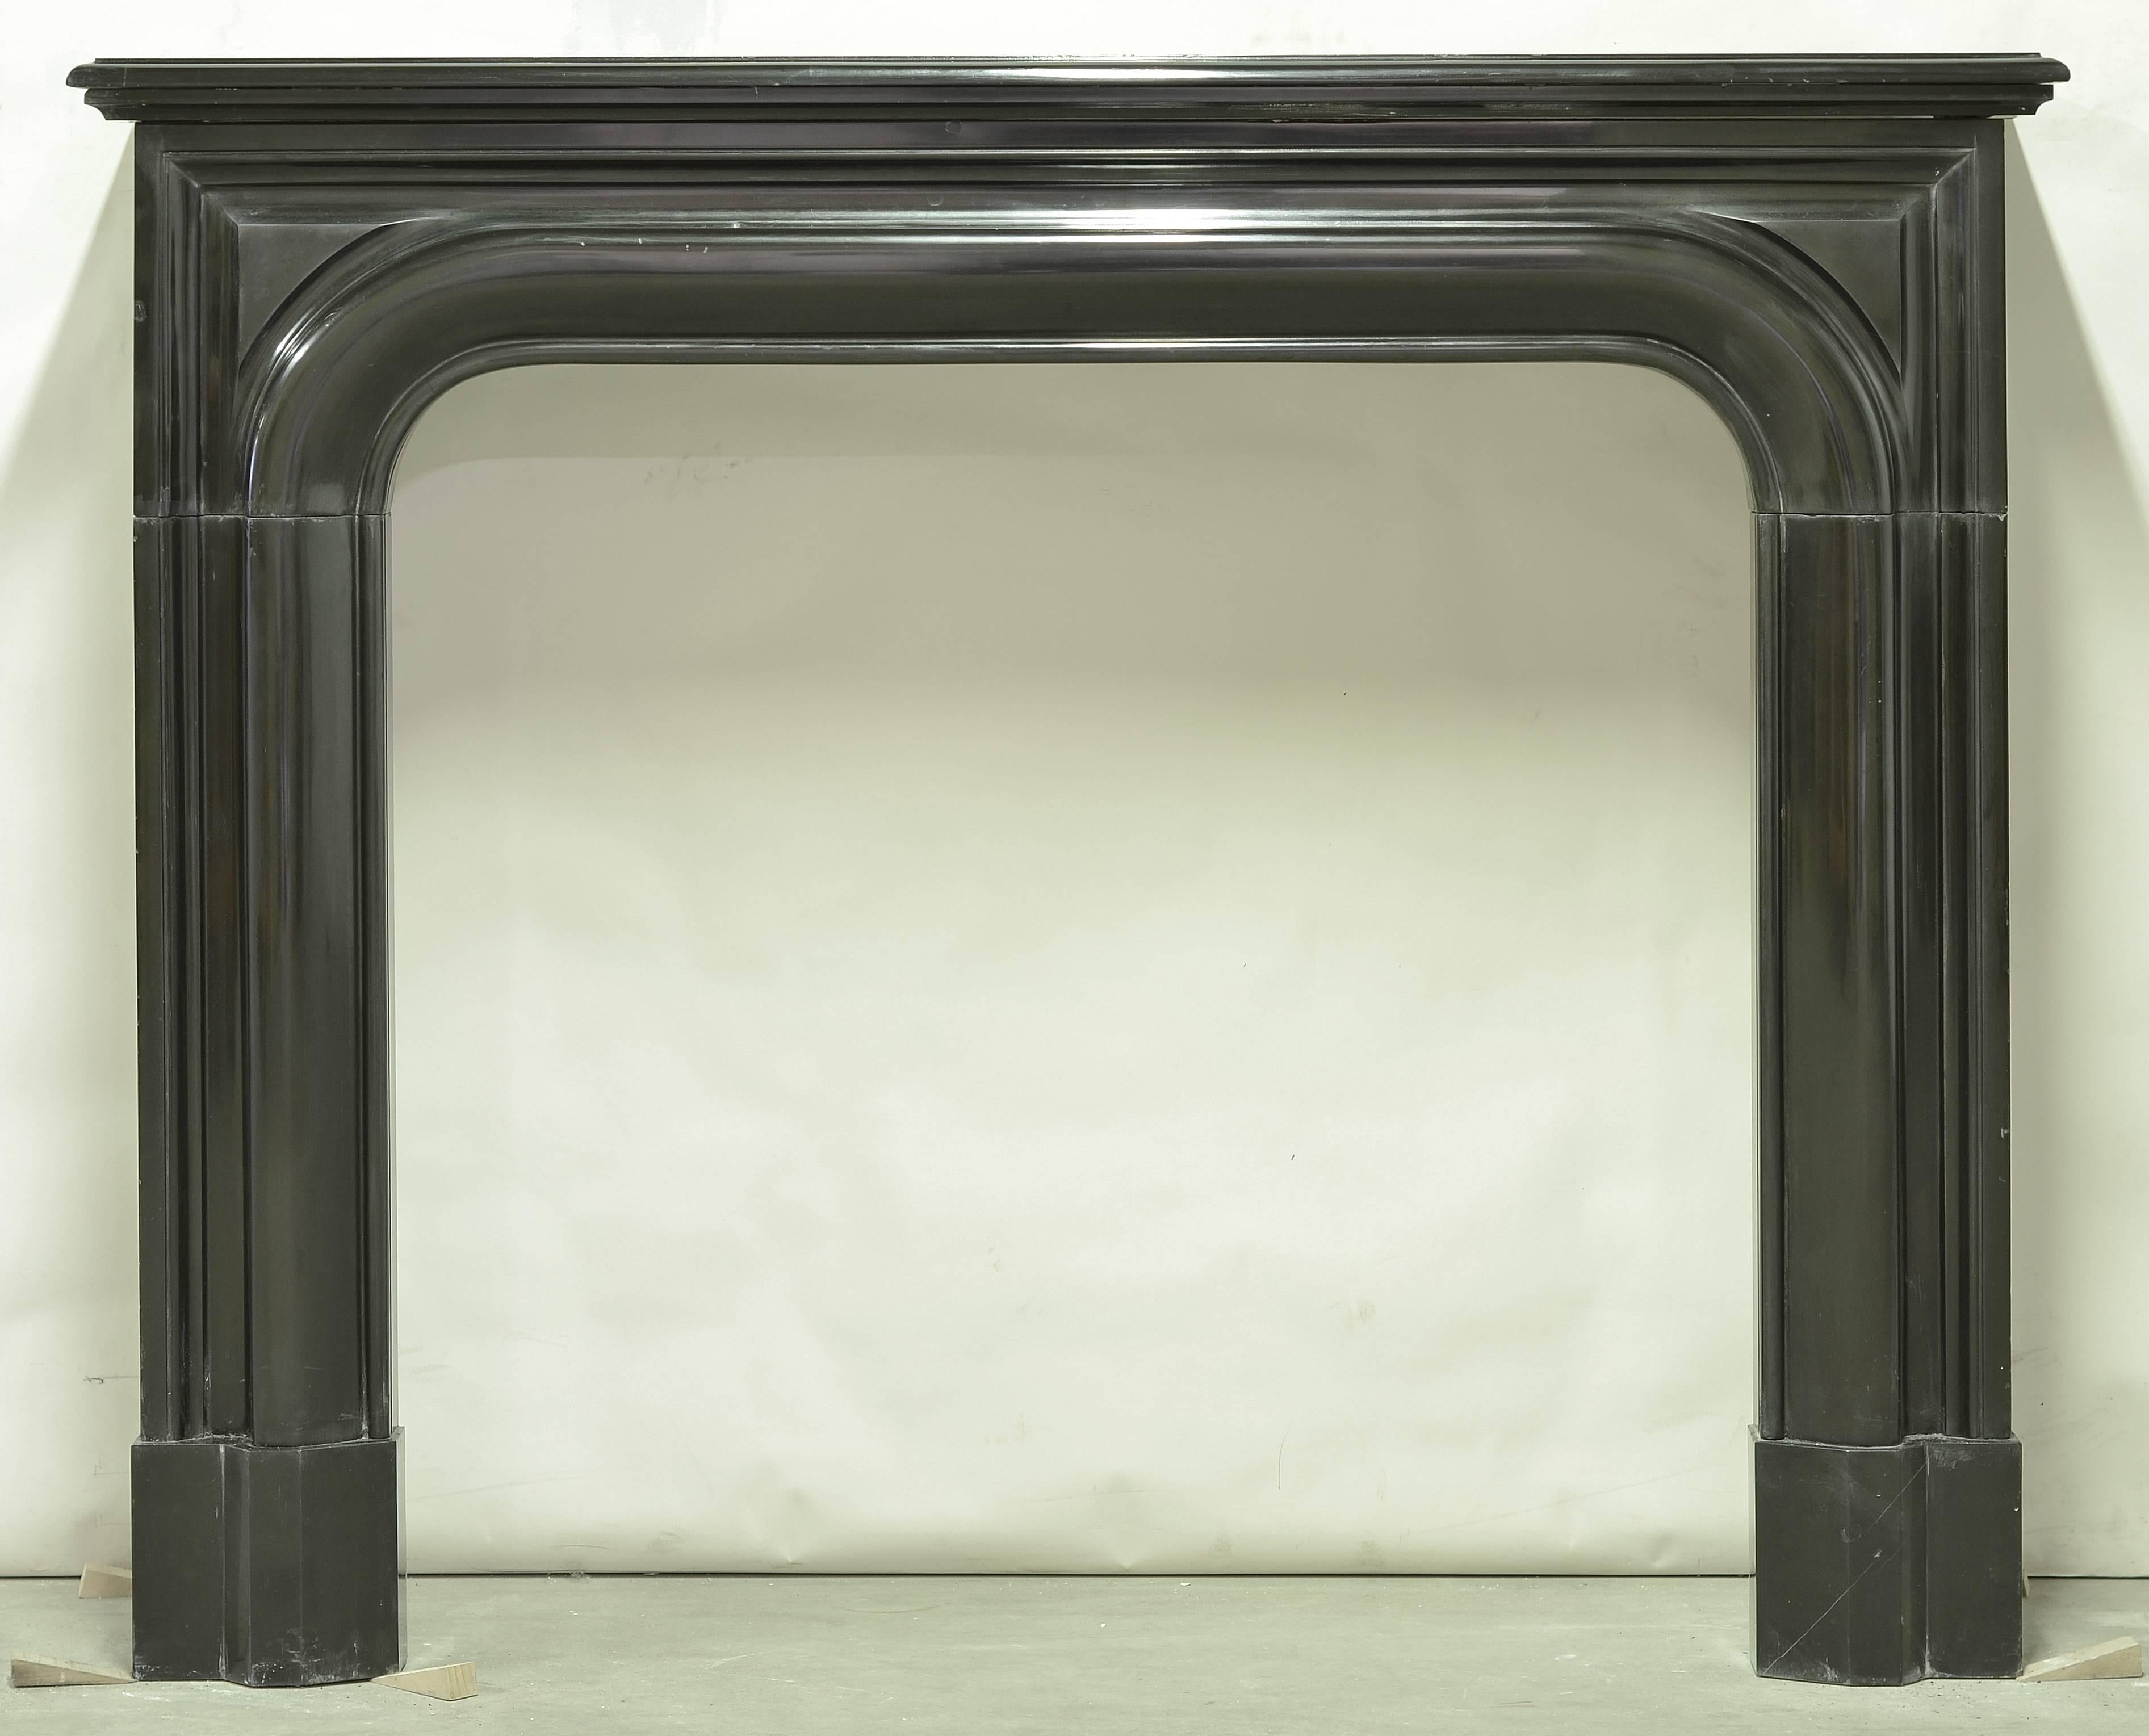 Beautiful 19th century French Louis XIV fireplace in gorgeous Belgian black marble.

Opening measurements: 33.4 x 34.6 inch or 85 x 88 cm (height x width).
  